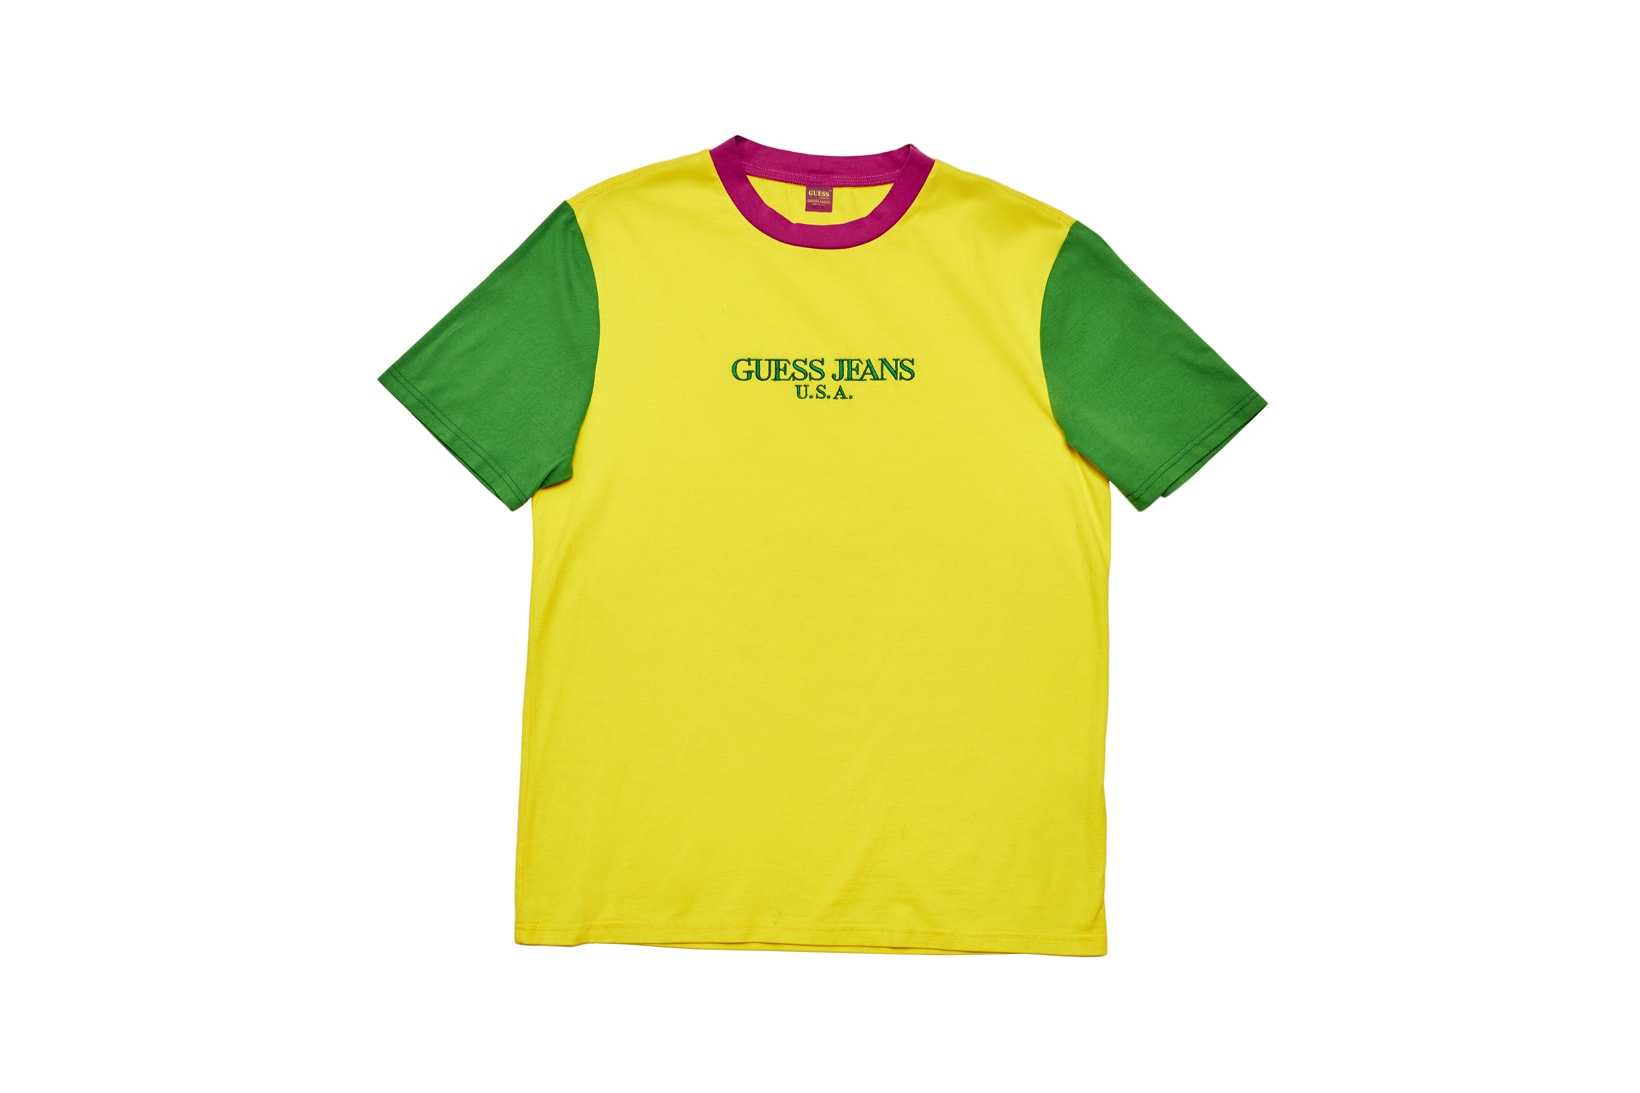 GUESS Jeans U.S.A. Farmers Market Capsule Collection Colorblocked T-Shirt Yellow Green